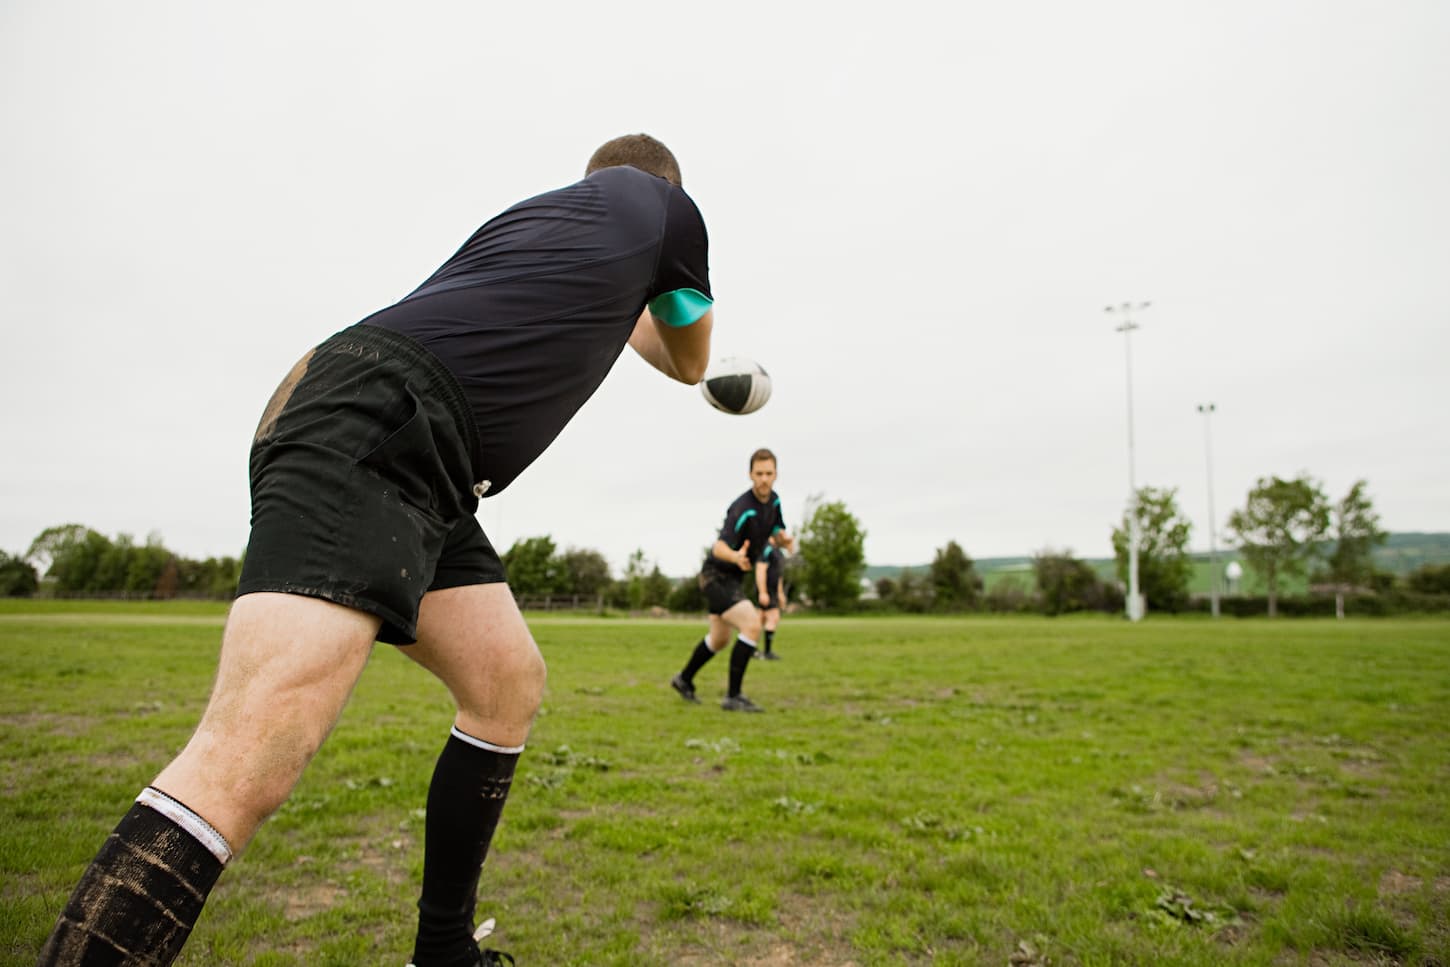 An image of a Rugby game in action. 2 players in the position.